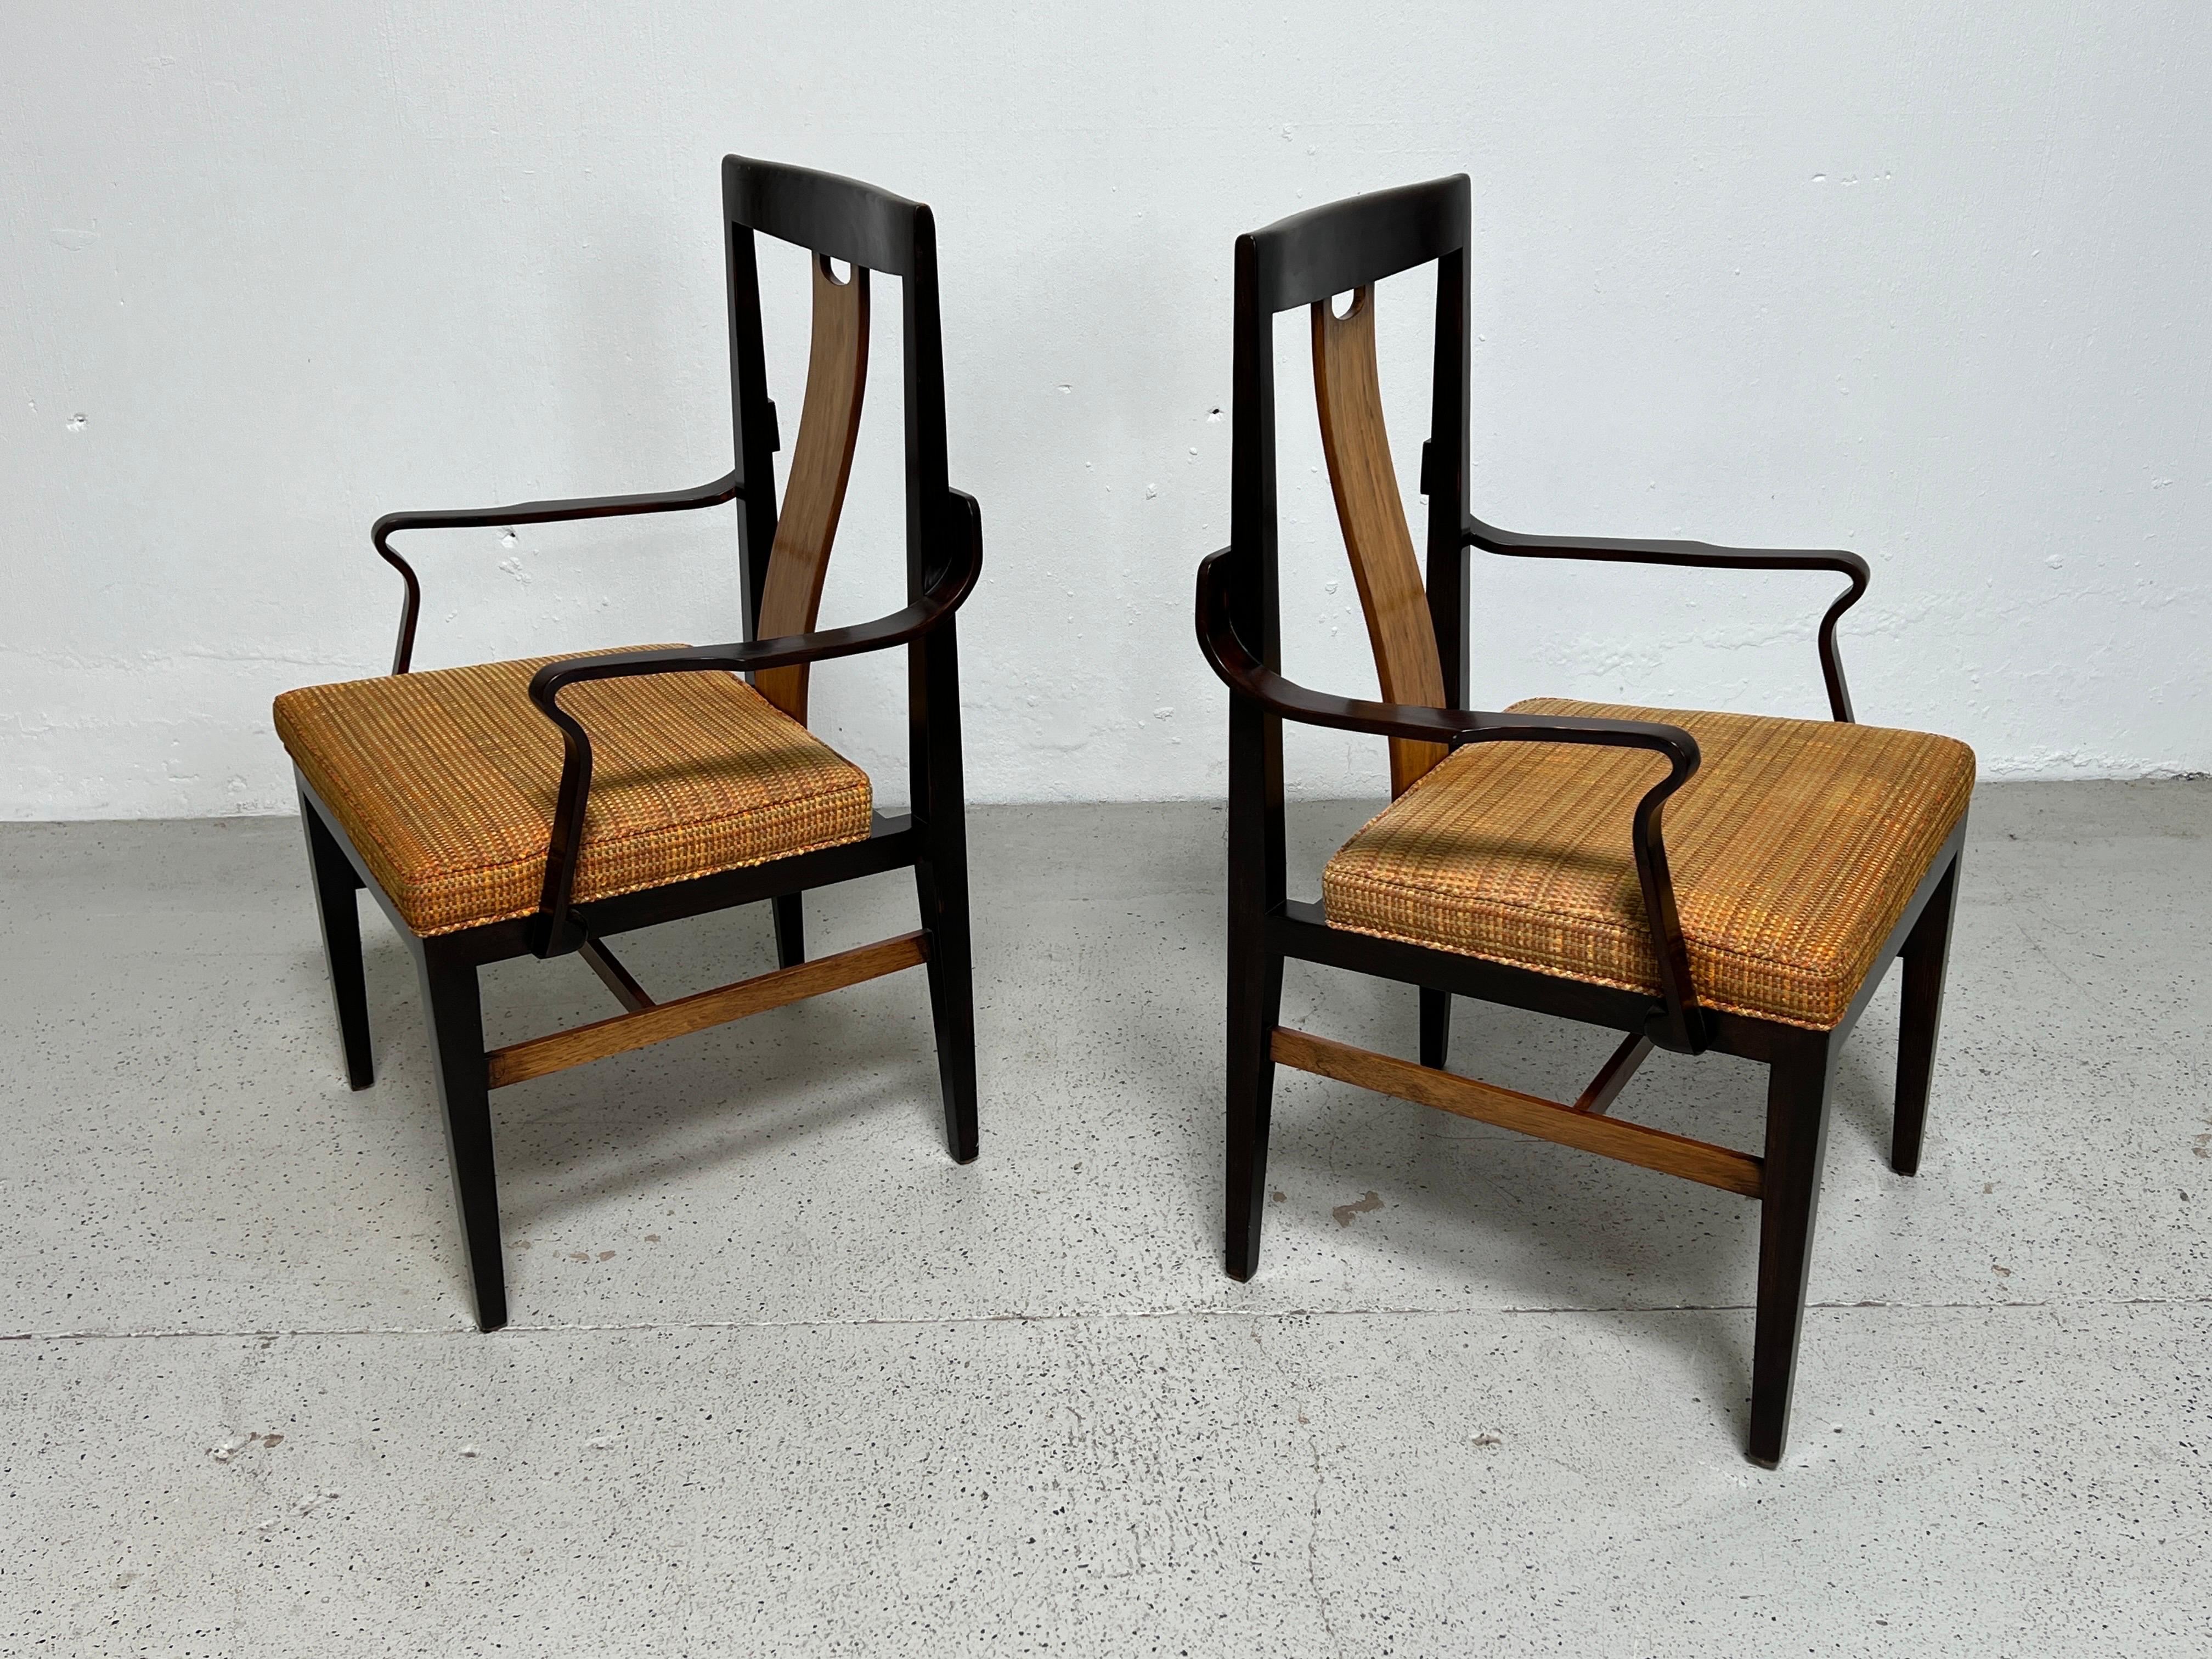 A rare pair of ash and rosewood armchairs designed by Edward Wormley for Dunbar. Matching set of four side chairs available separately. 